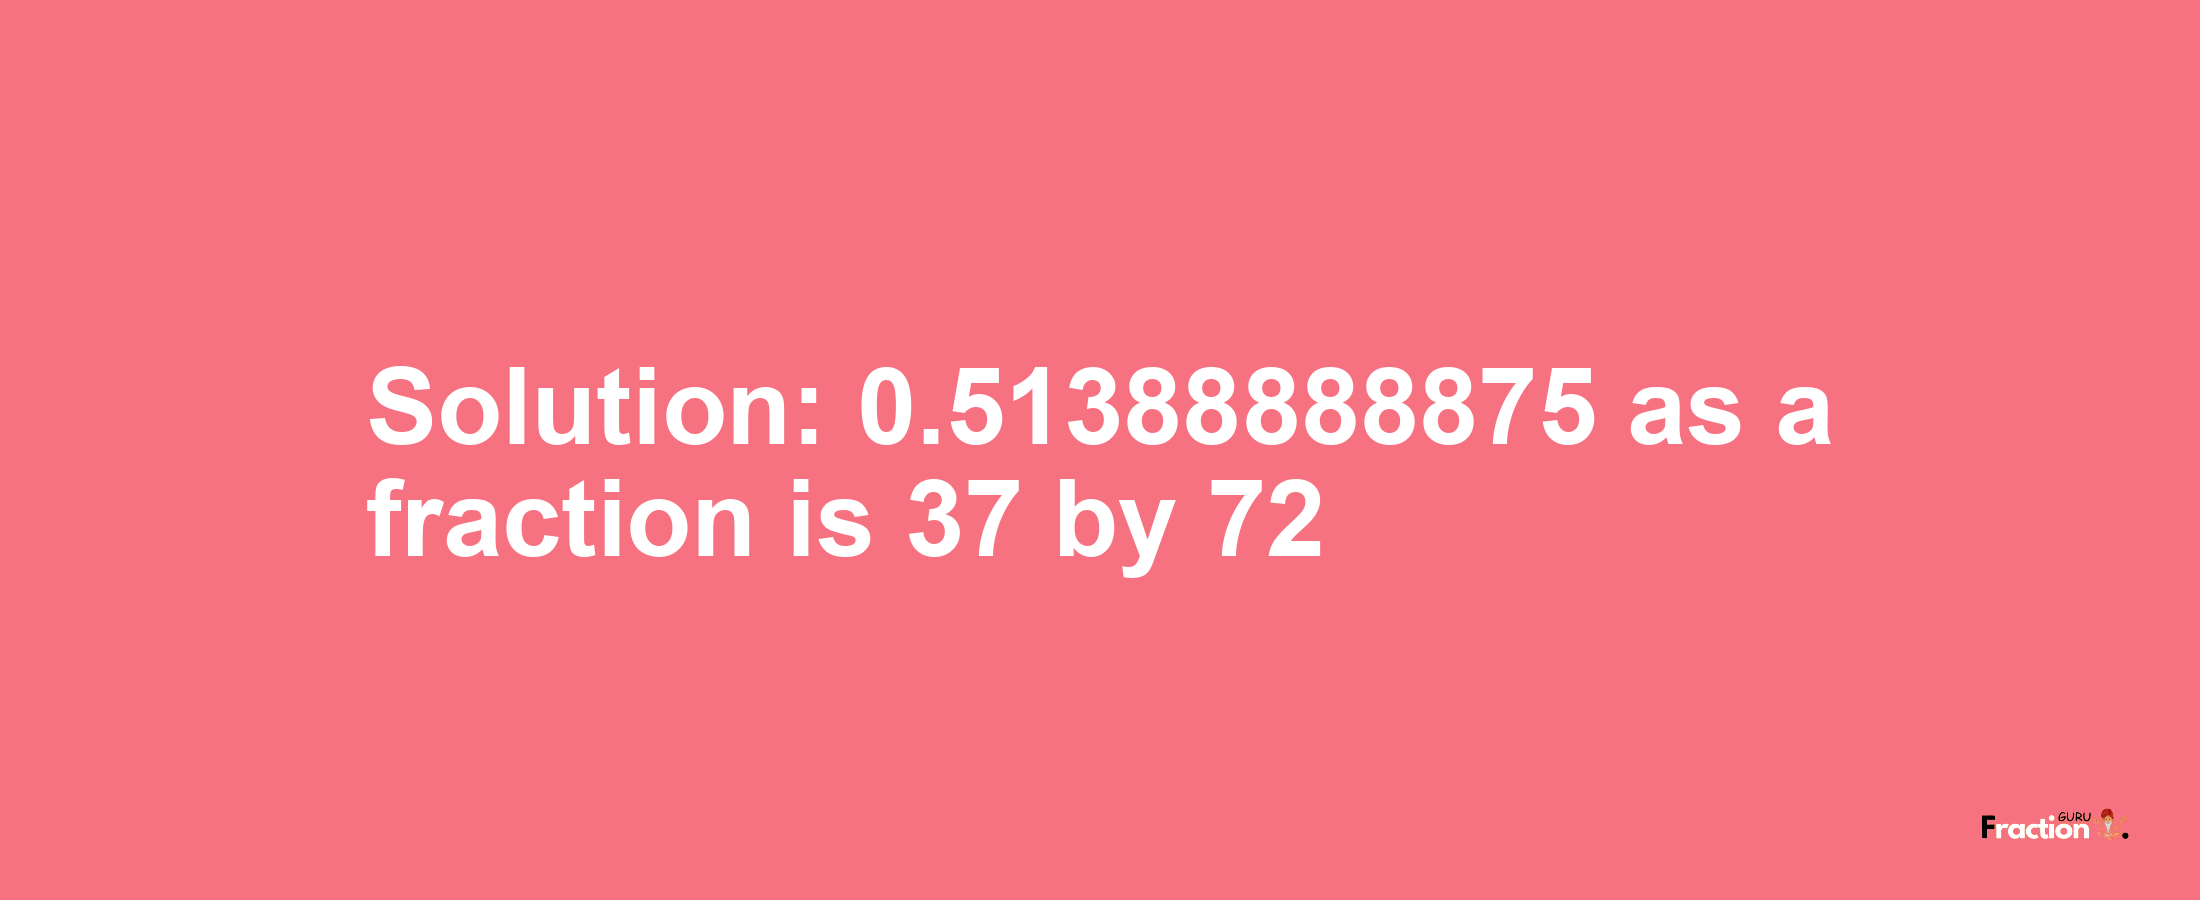 Solution:0.51388888875 as a fraction is 37/72